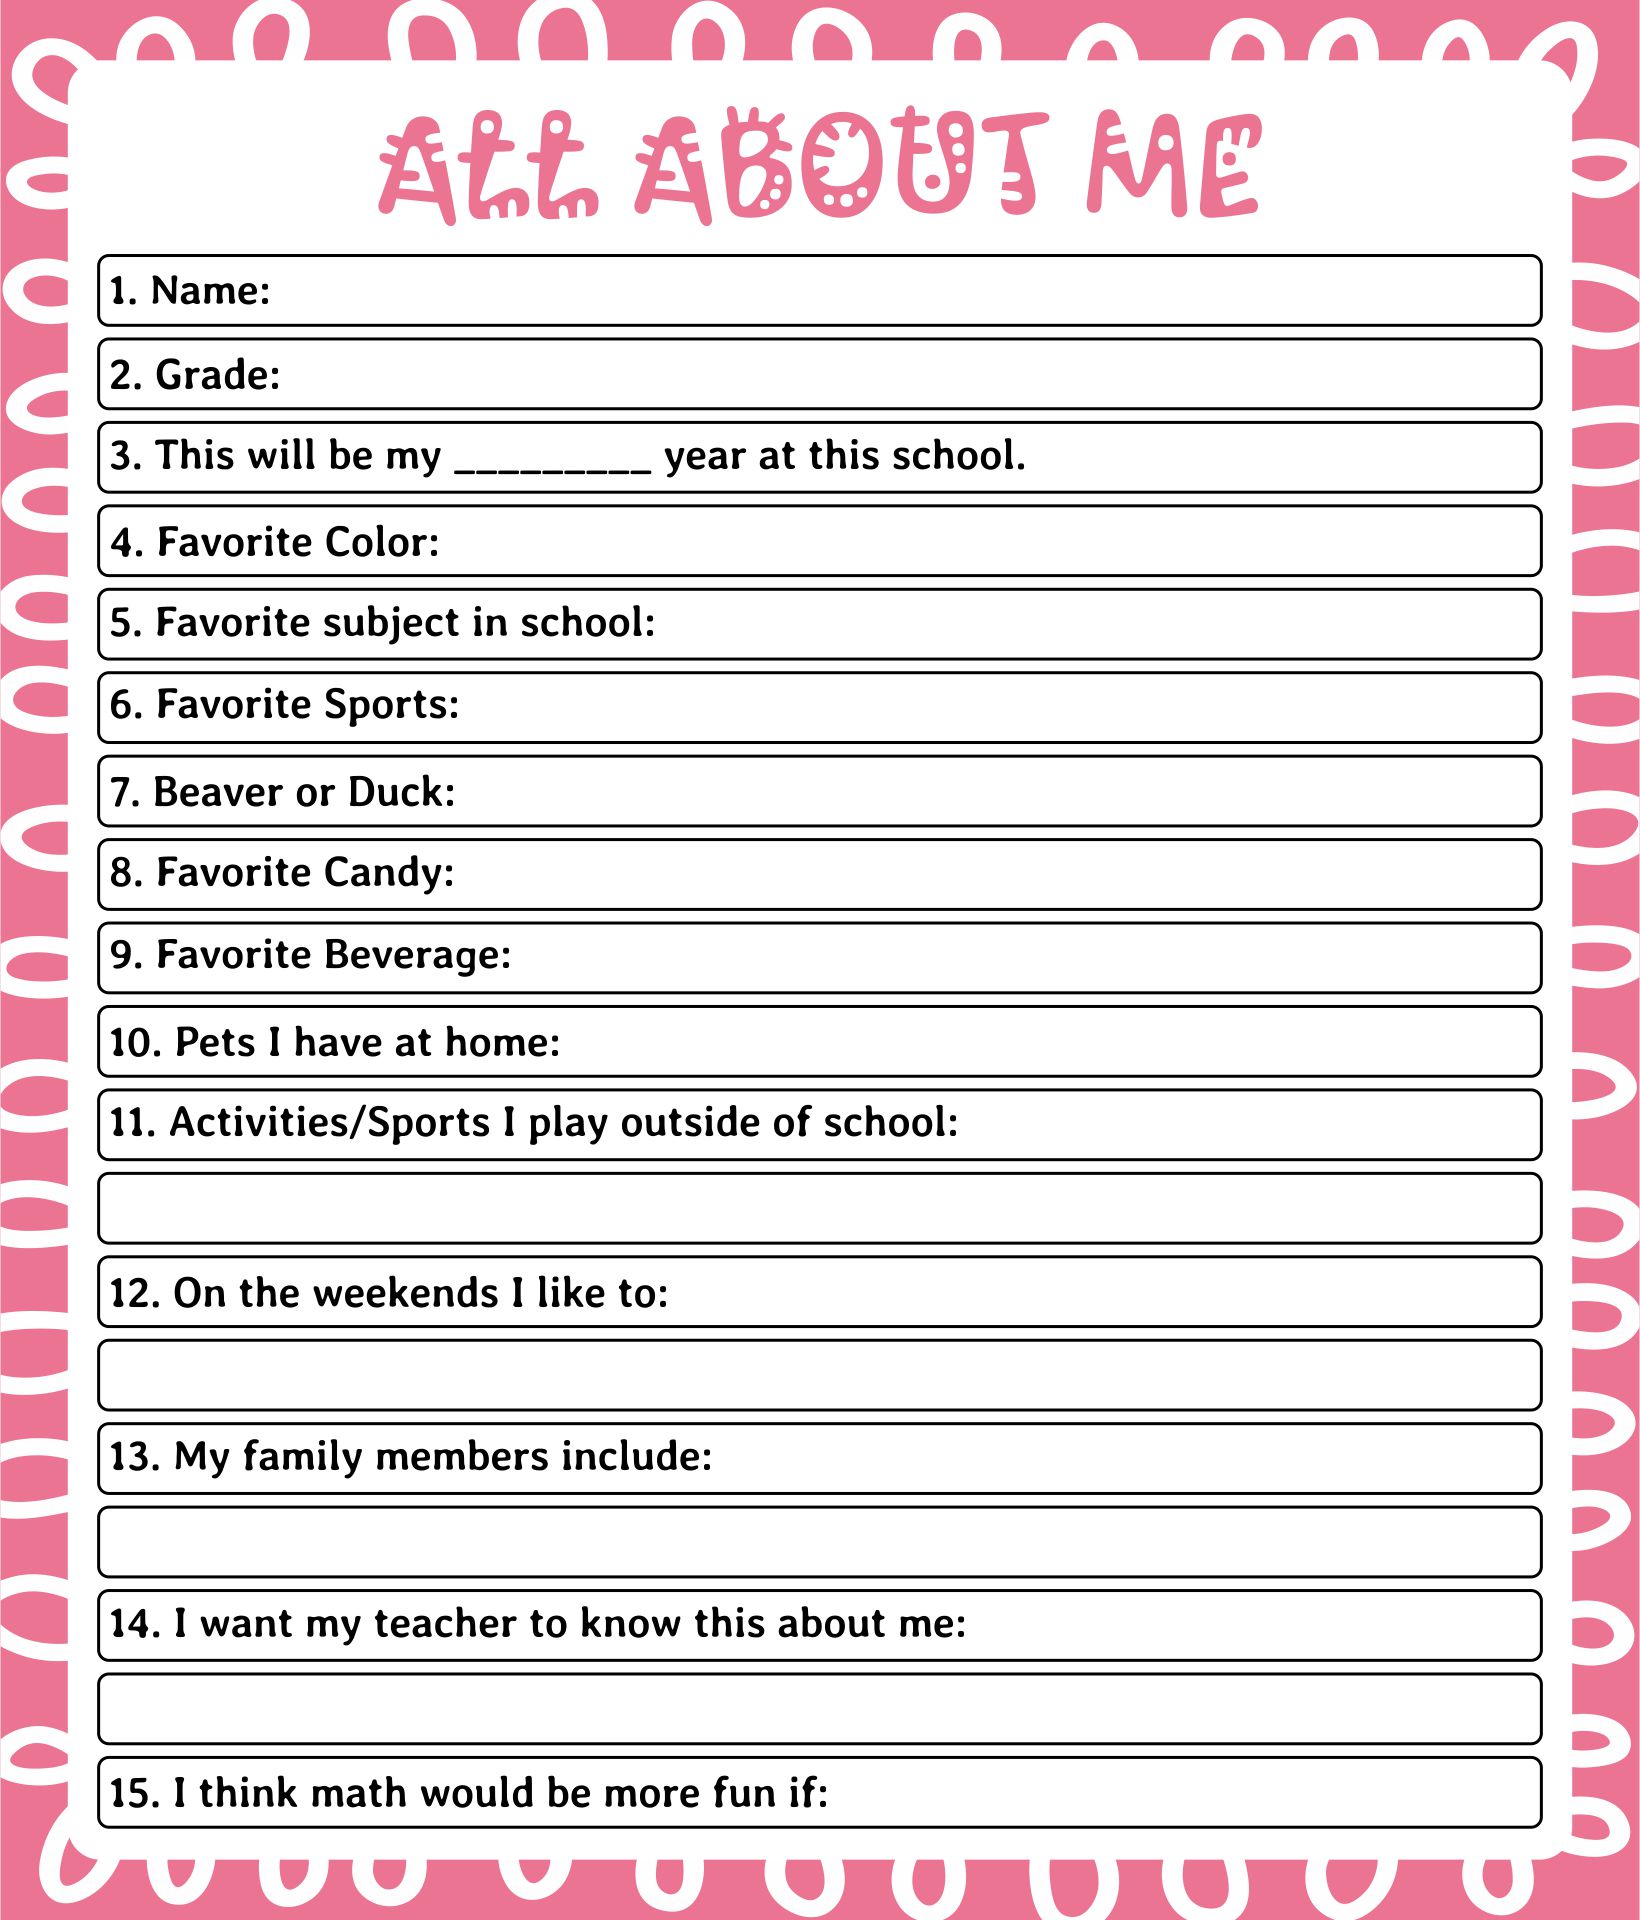 Printable All About Me Questions For Middle School Students Forms Templates